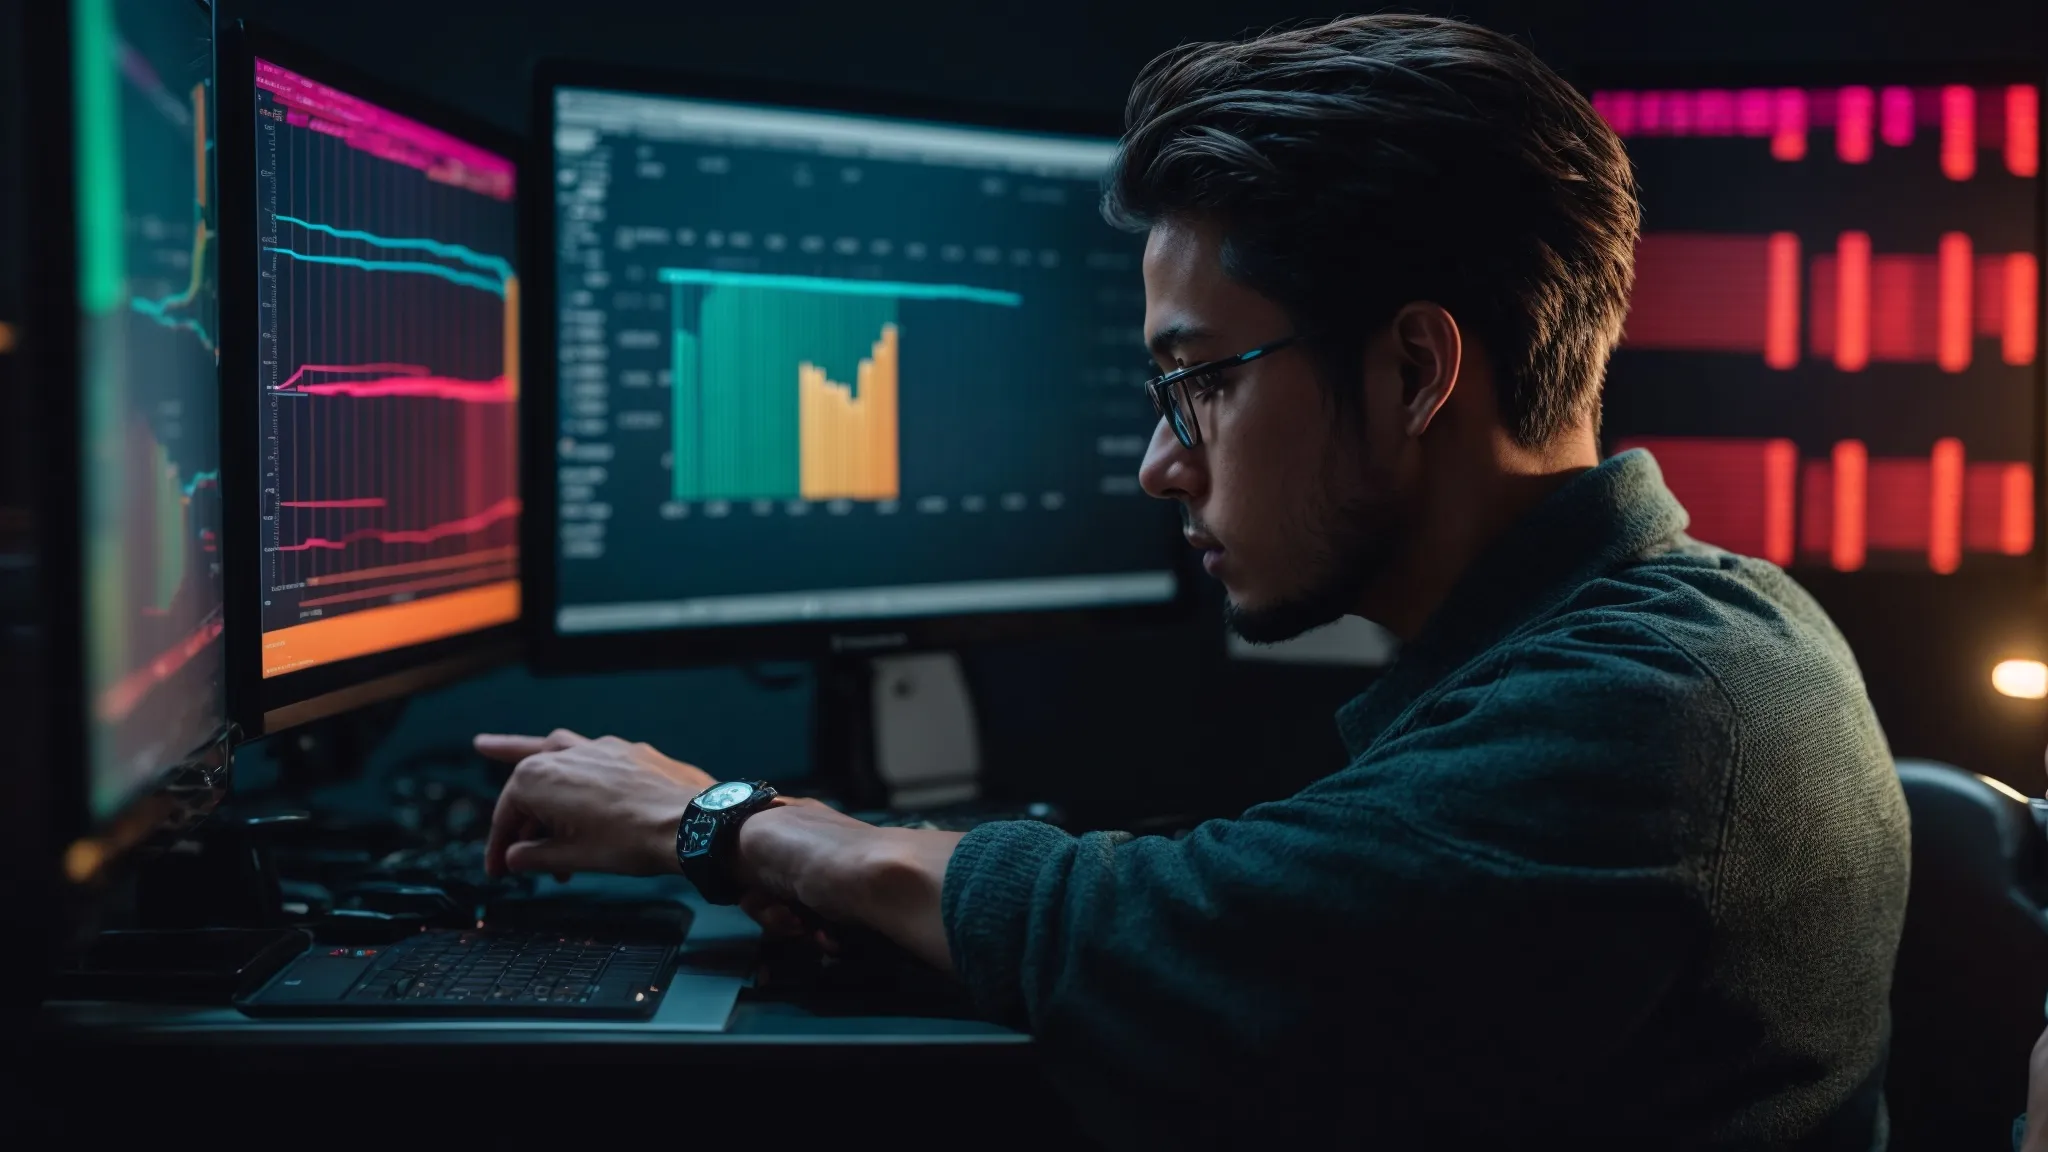 a focused person operates a computer, analyzing colorful graphs and charts on keyword performance.